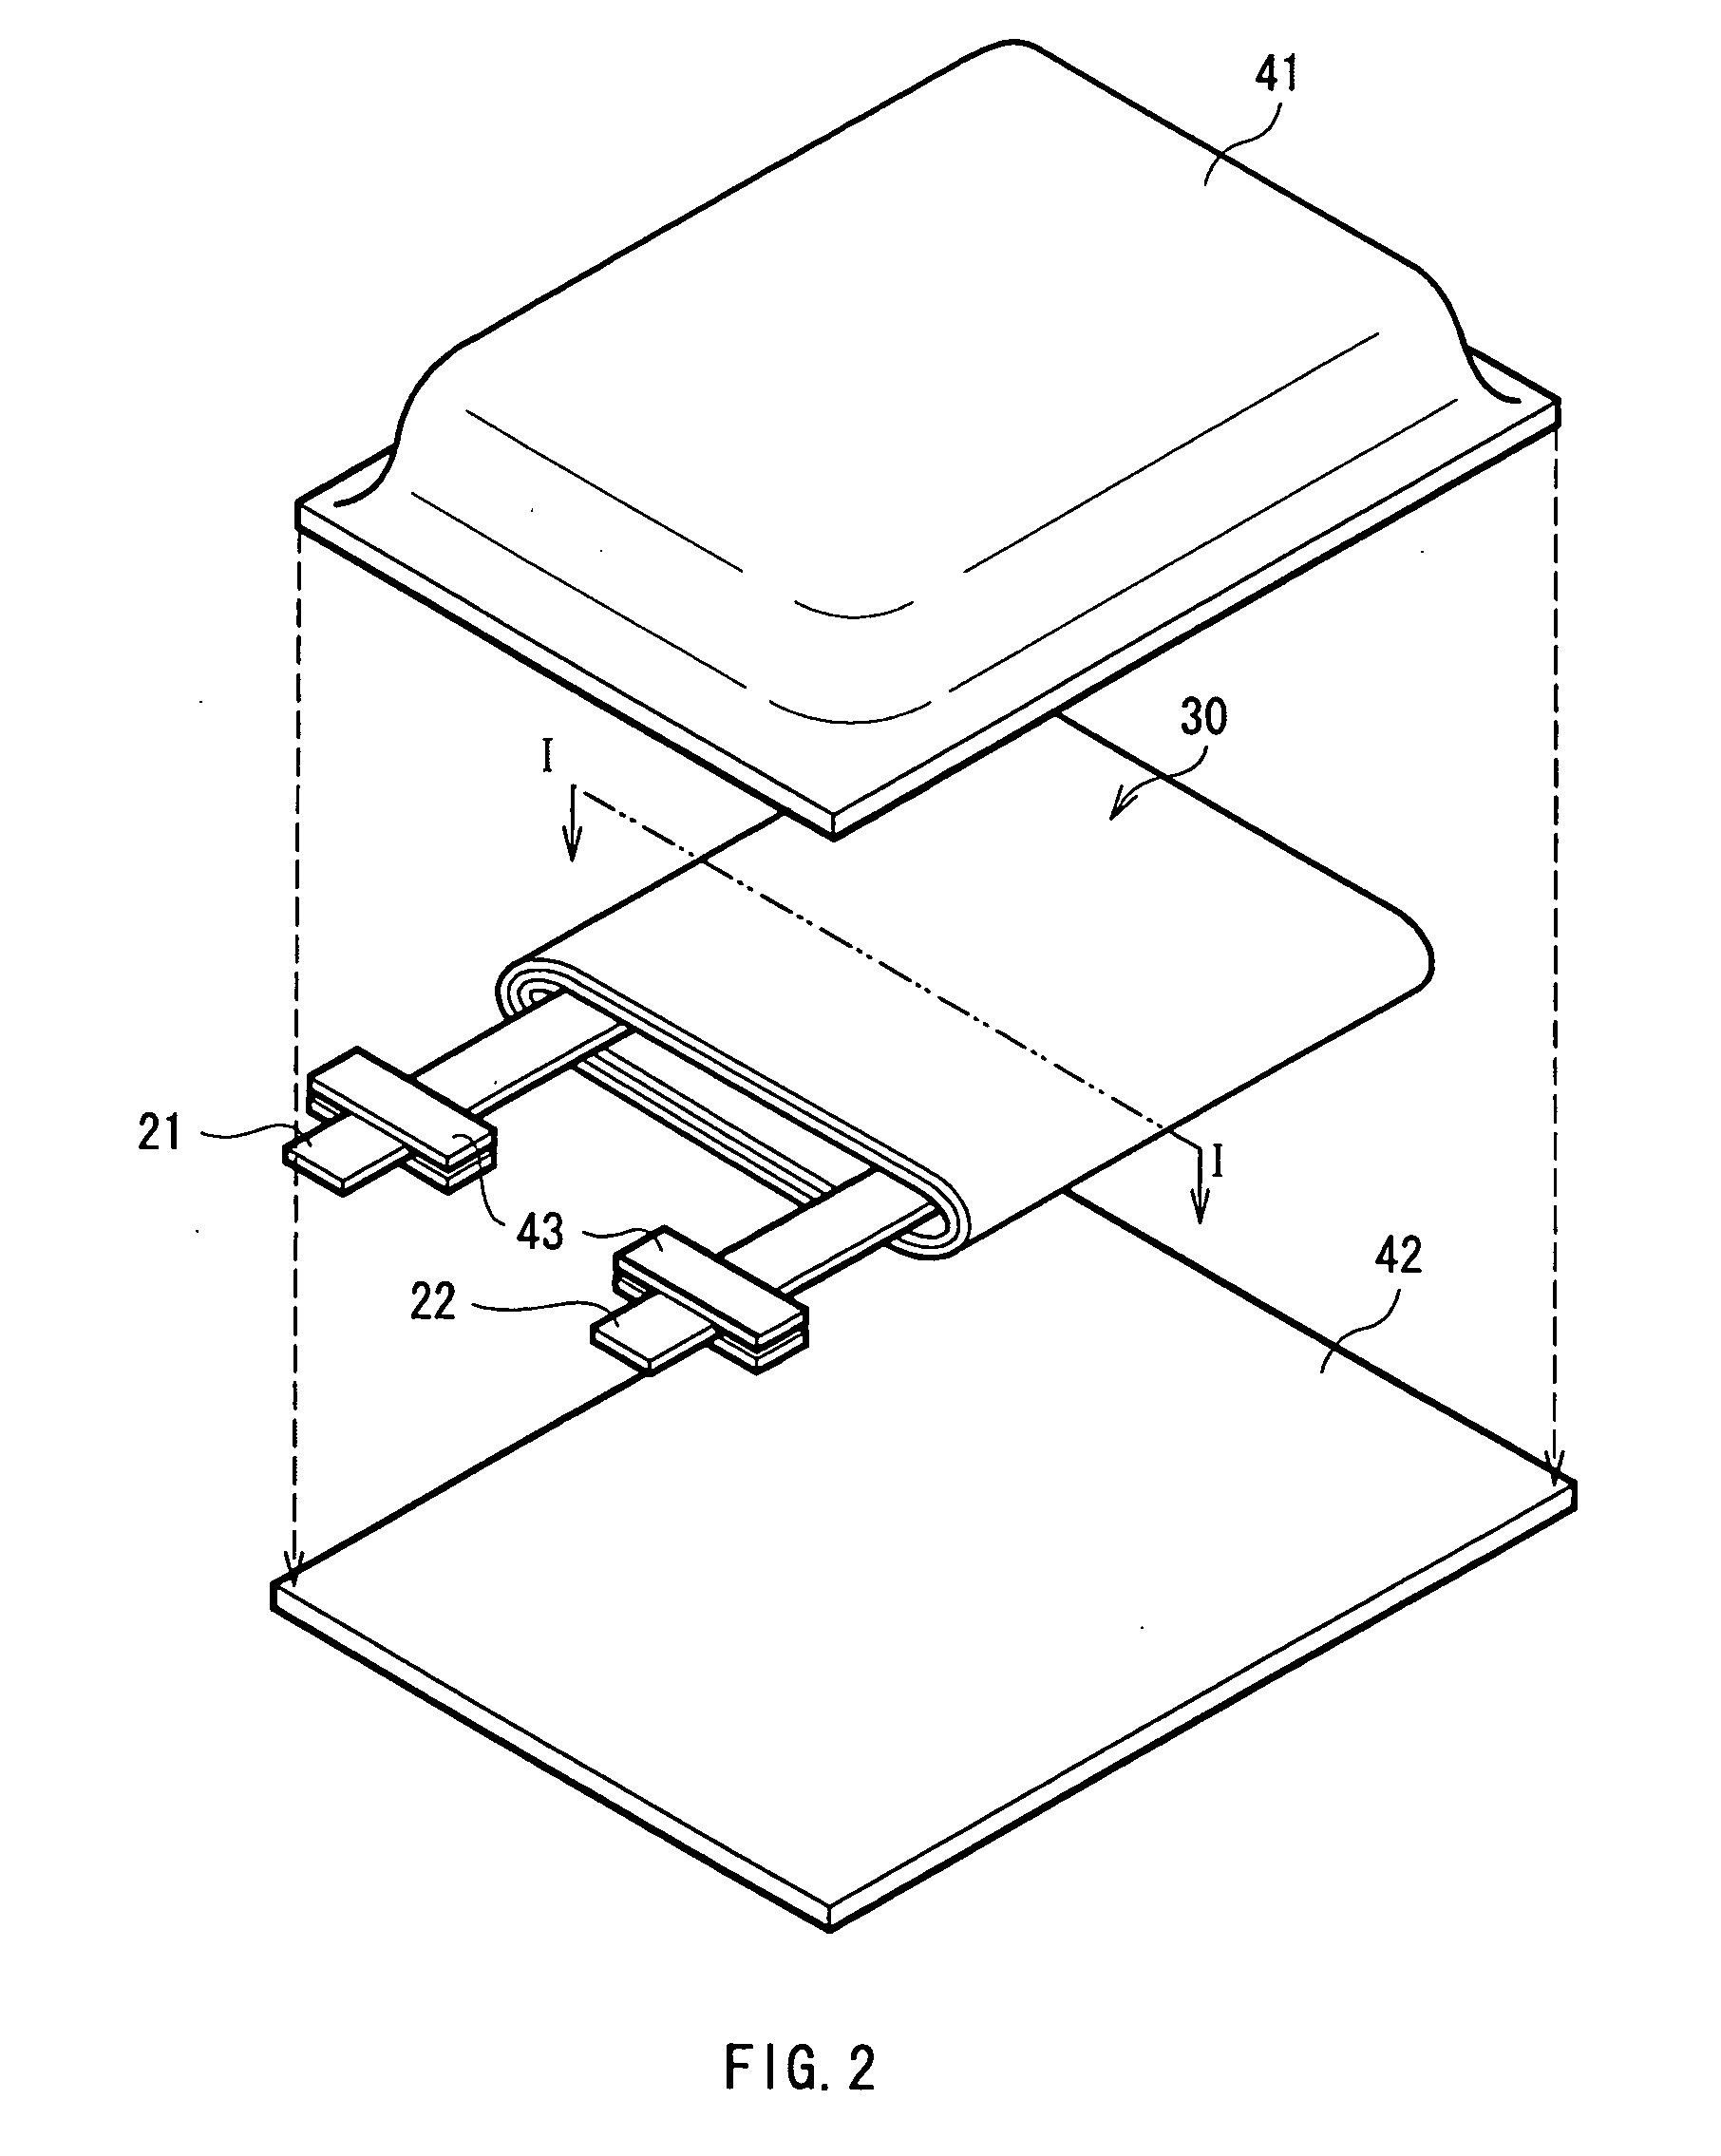 Battery, method of charging and discharging the battery and charge-discharge control device for the battery